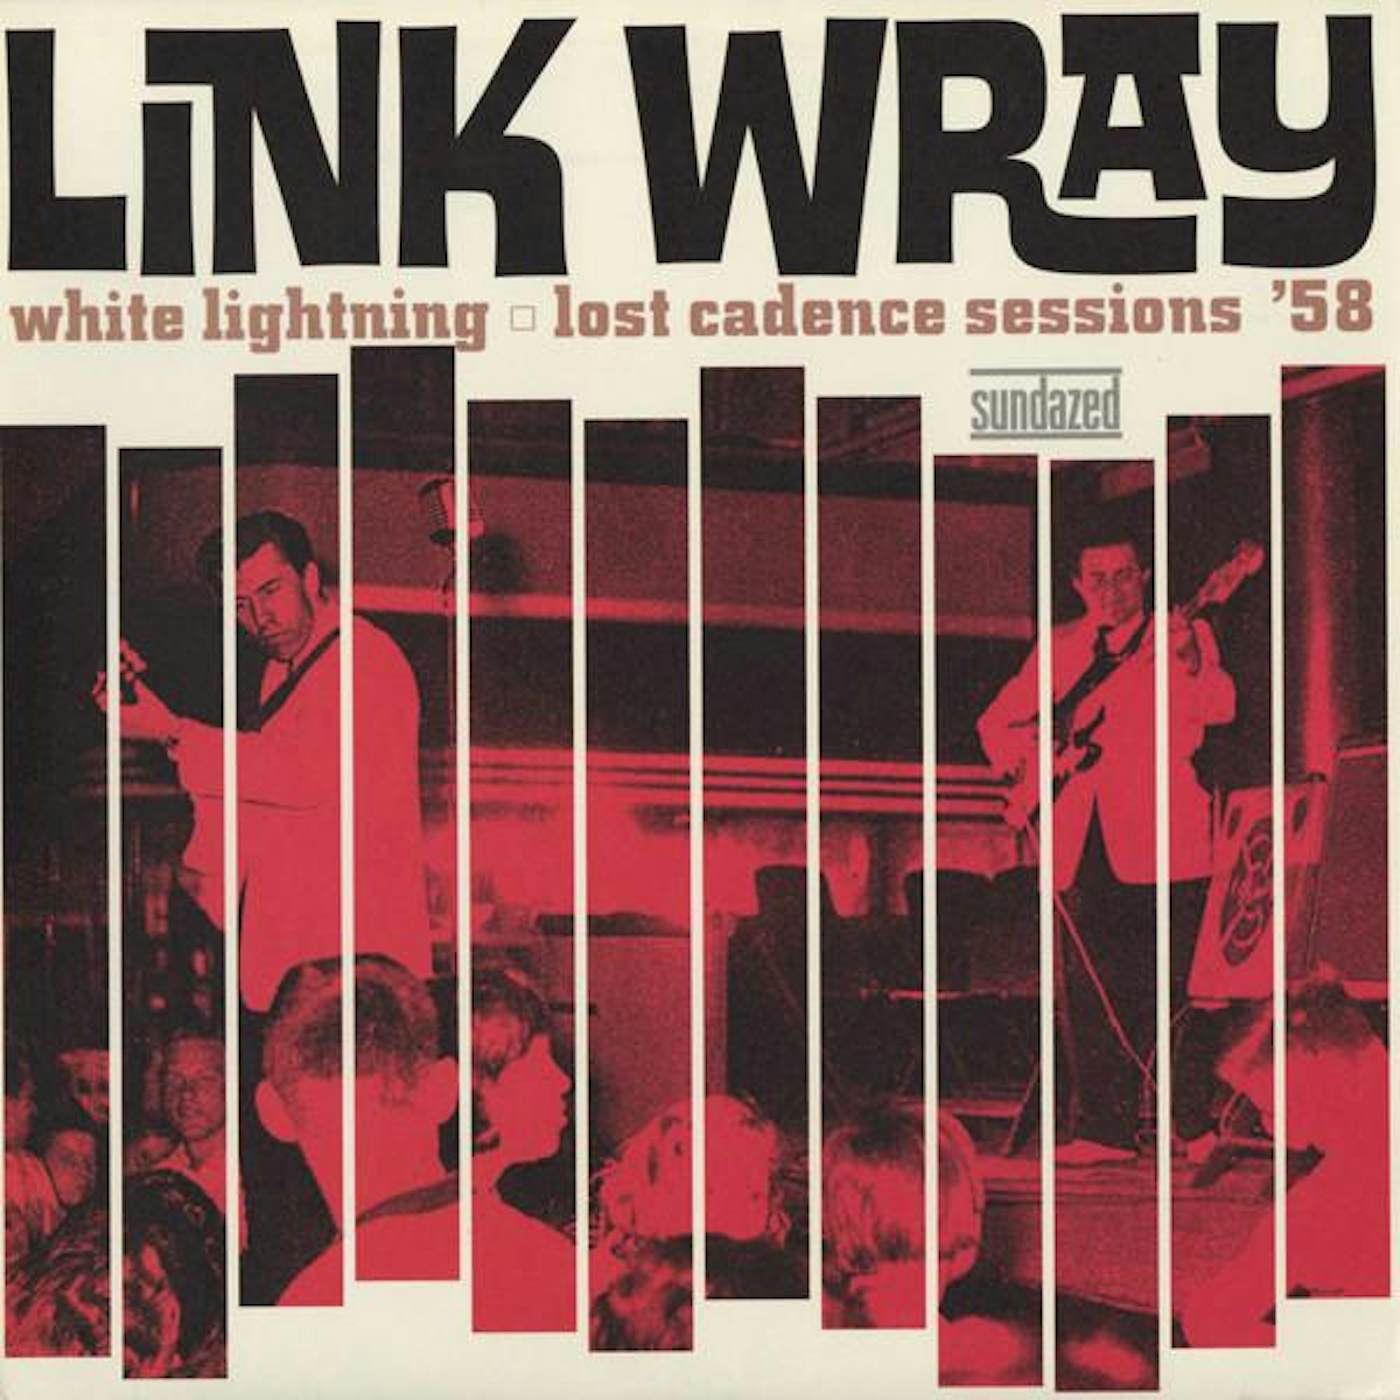 Link Wray WHITE LIGHTNING: LOST CADENCE SESSIONS Vinyl Record